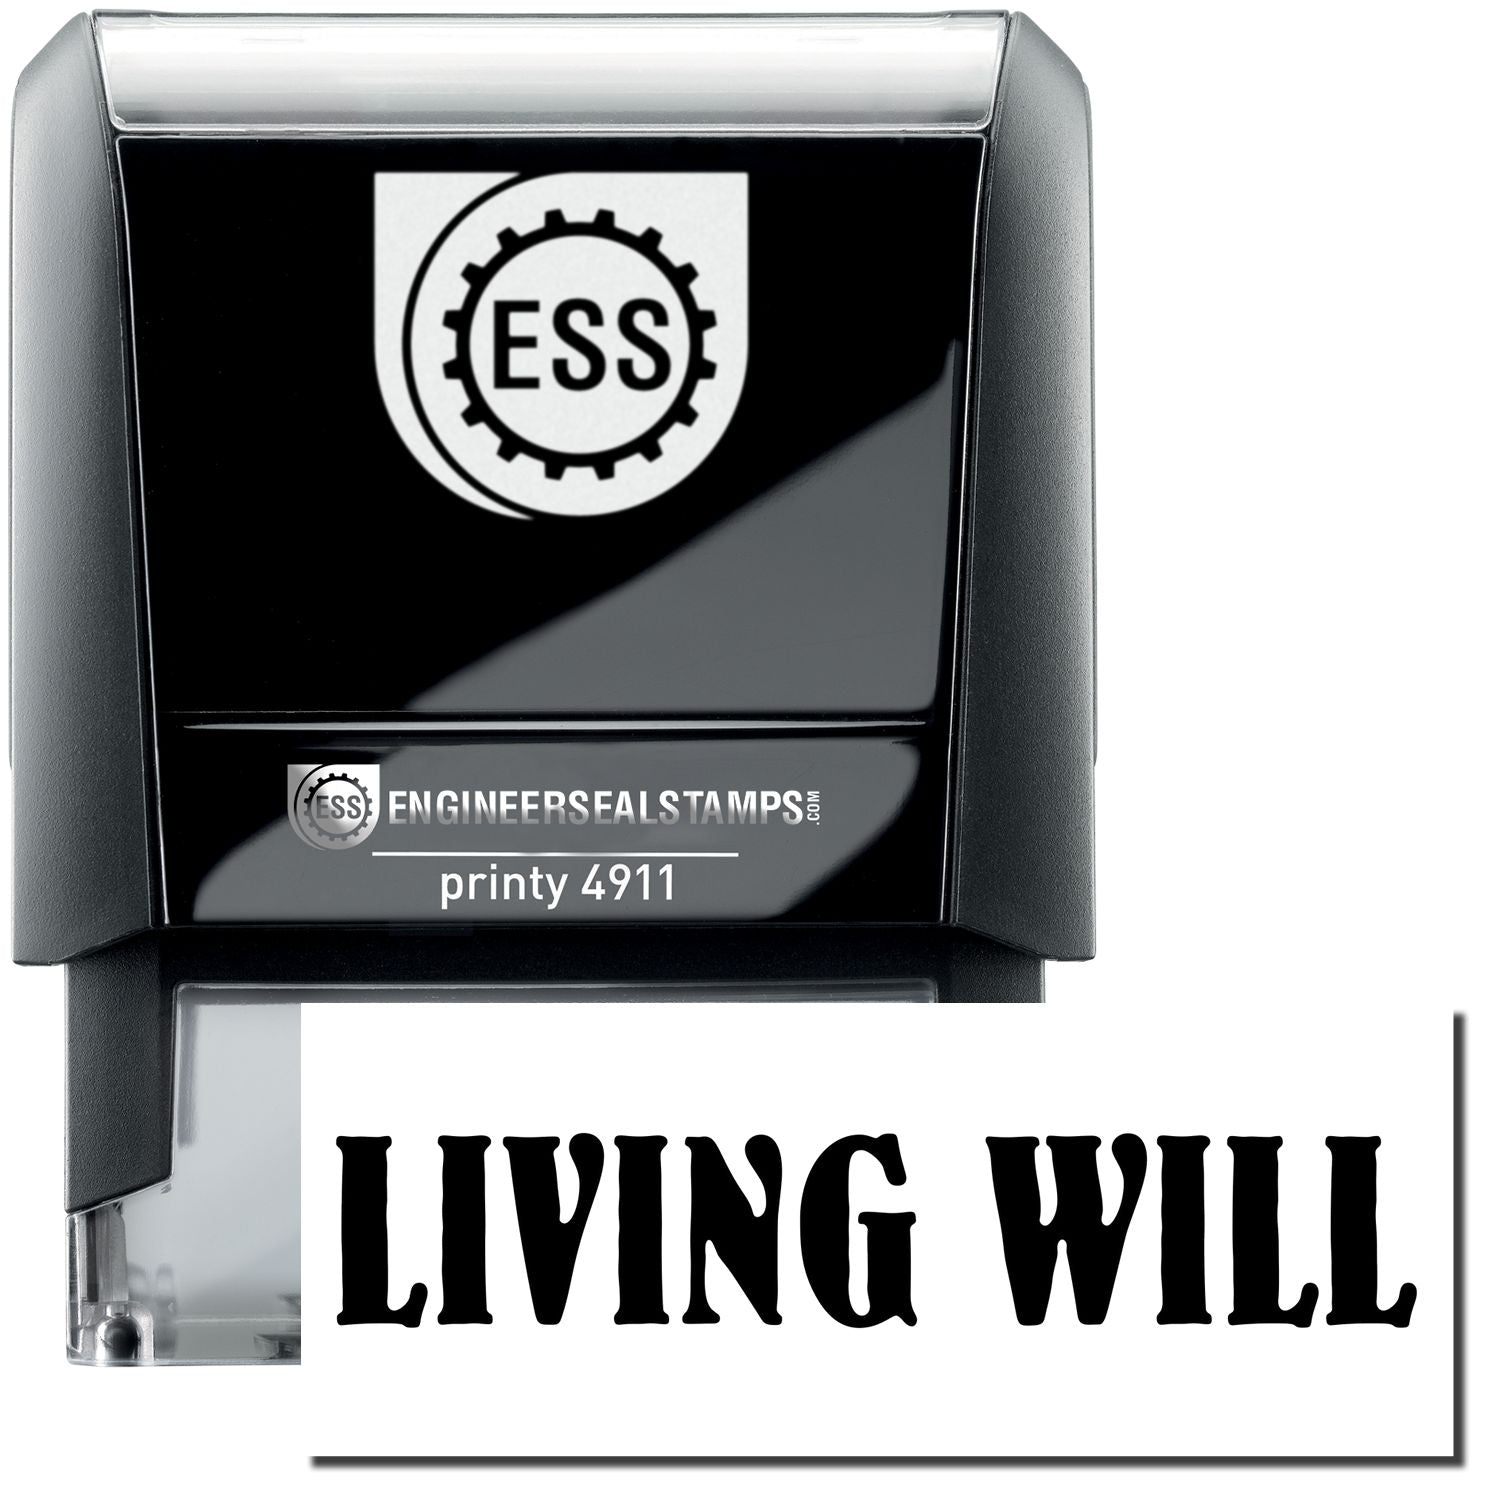 A self-inking stamp with a stamped image showing how the text "LIVING WILL" is displayed after stamping.